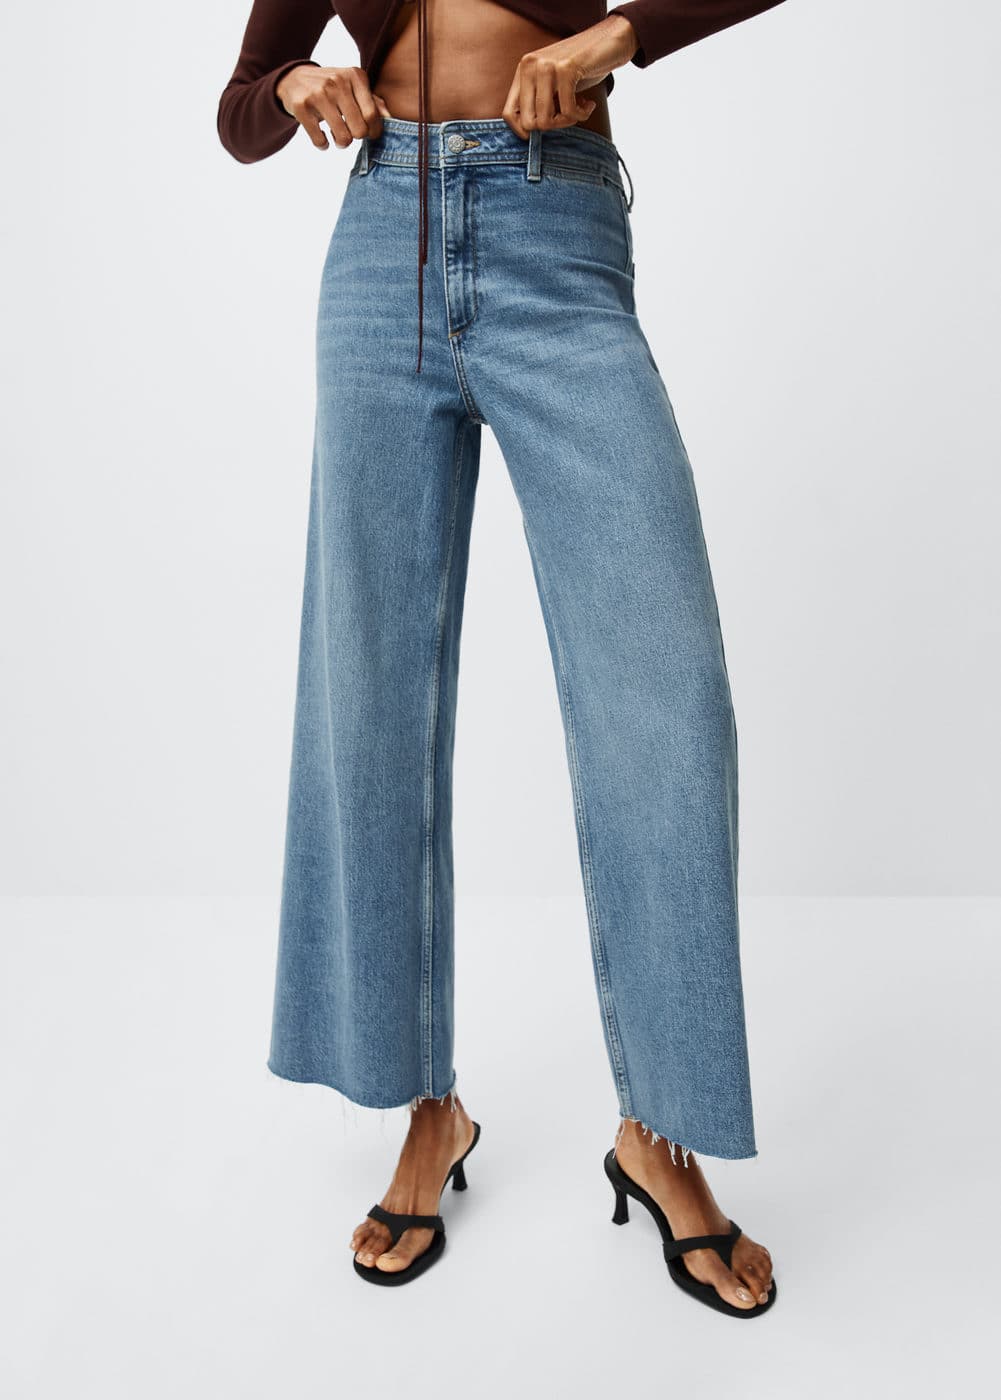 The 25 Best Cropped Wide-Leg Jeans to Wear With Sandals | Who What Wear UK